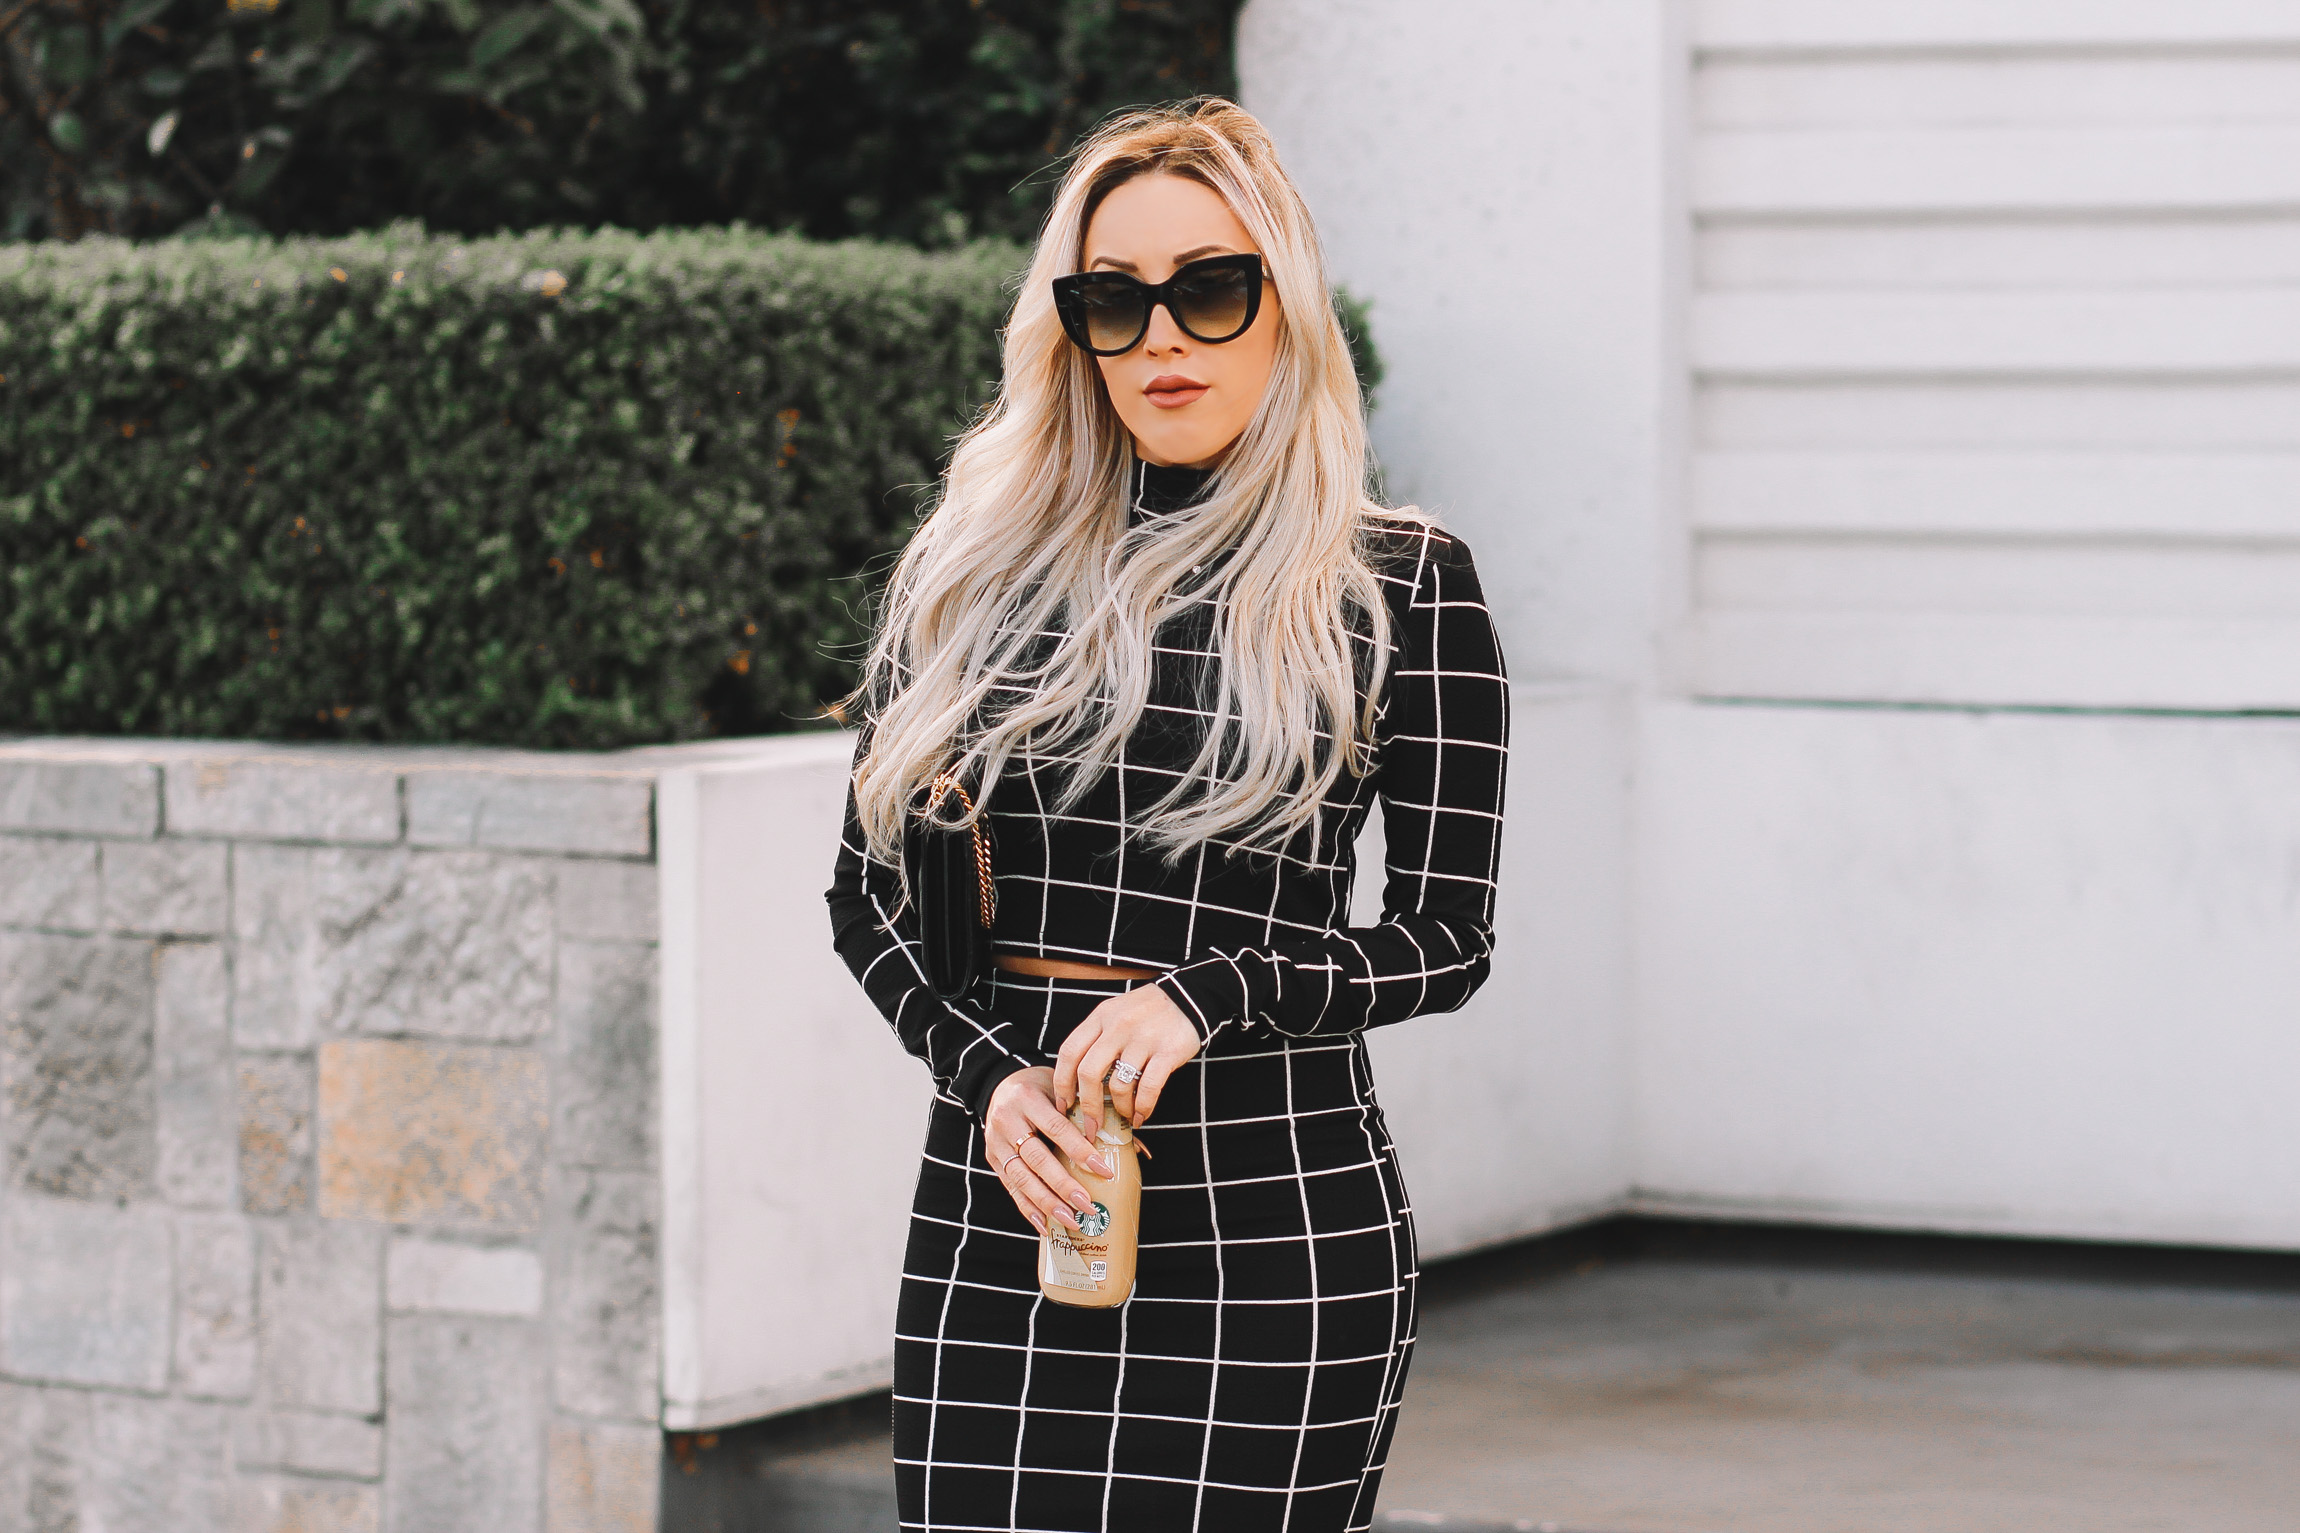 Grid Print Two Piece Business Style | Black YSL Bag | Nude Louboutins | Blondie in the City by Hayley Larue